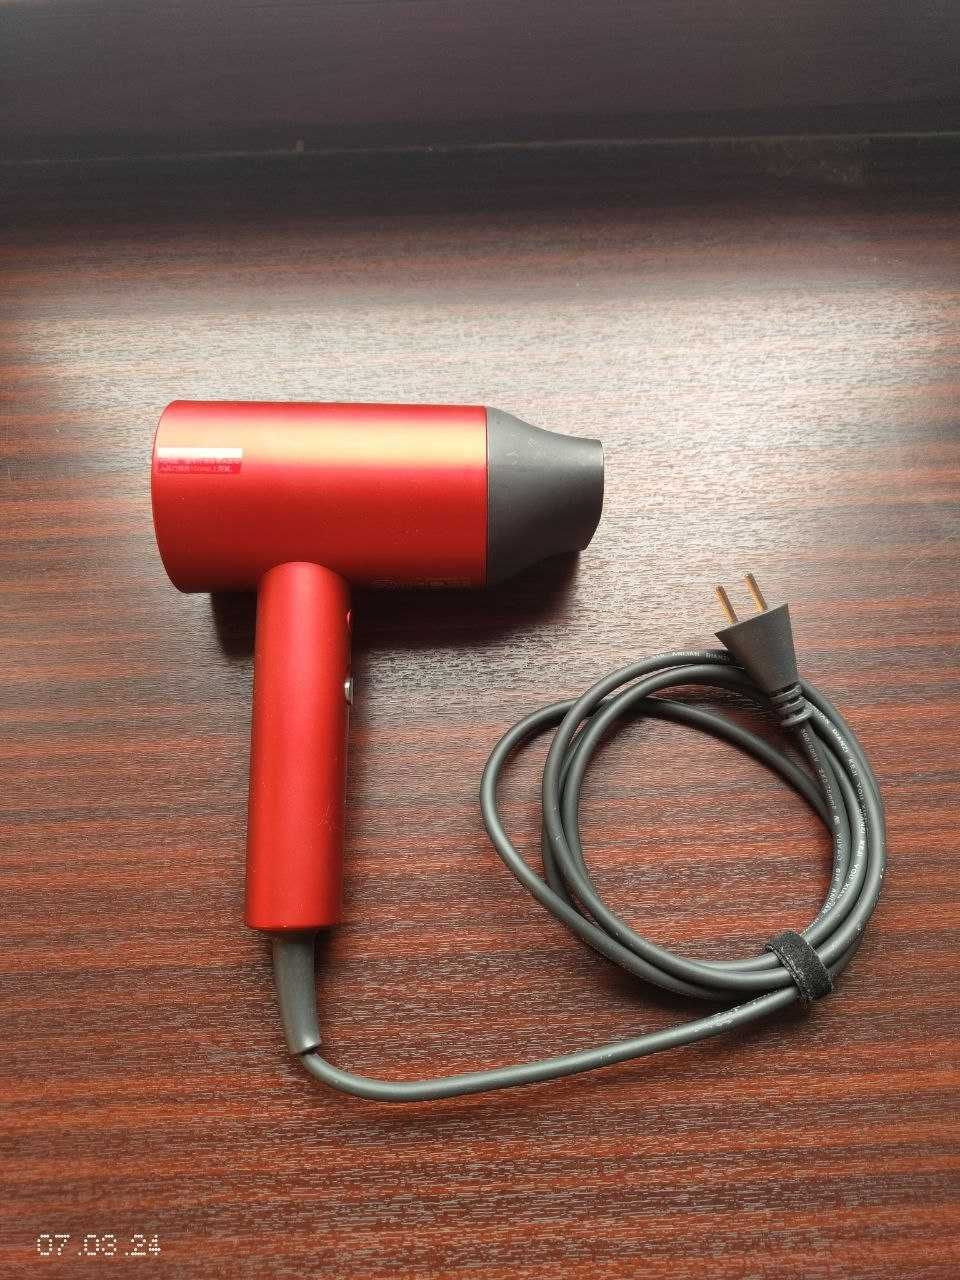 Фен ShowSee Hair Dryer A5